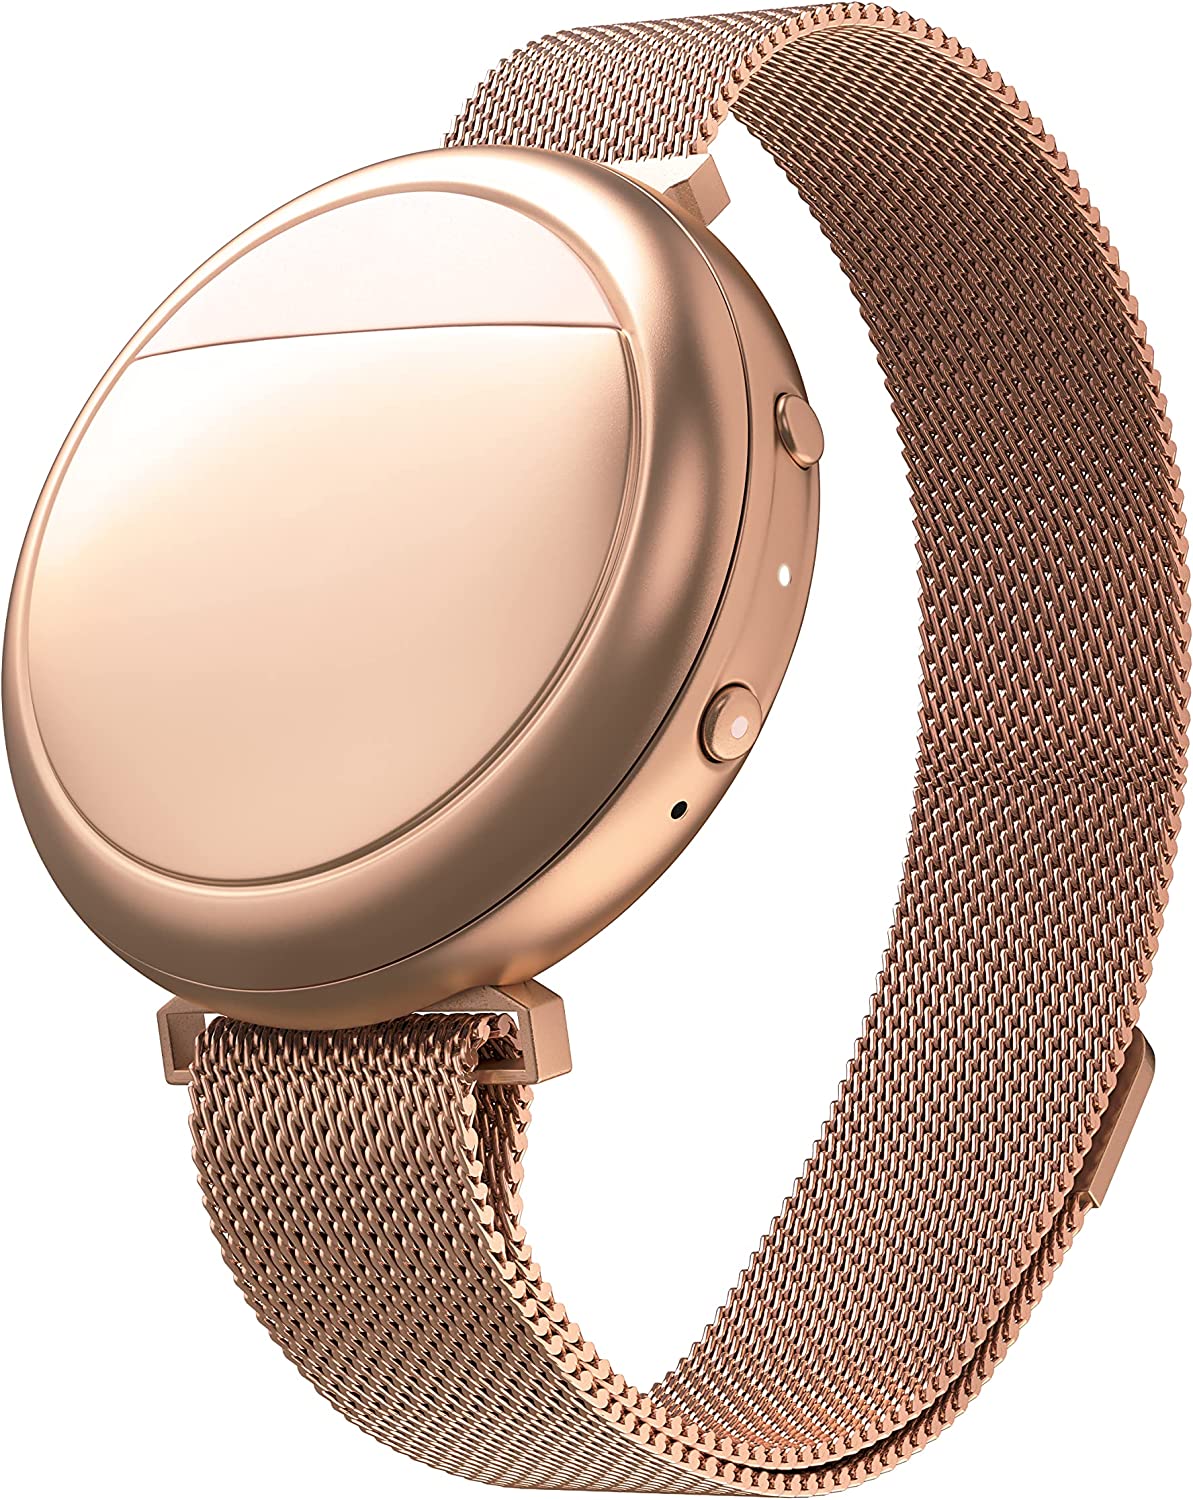 Embr Wave 2 Thermal Menopause Relief Wristband - Rose Gold